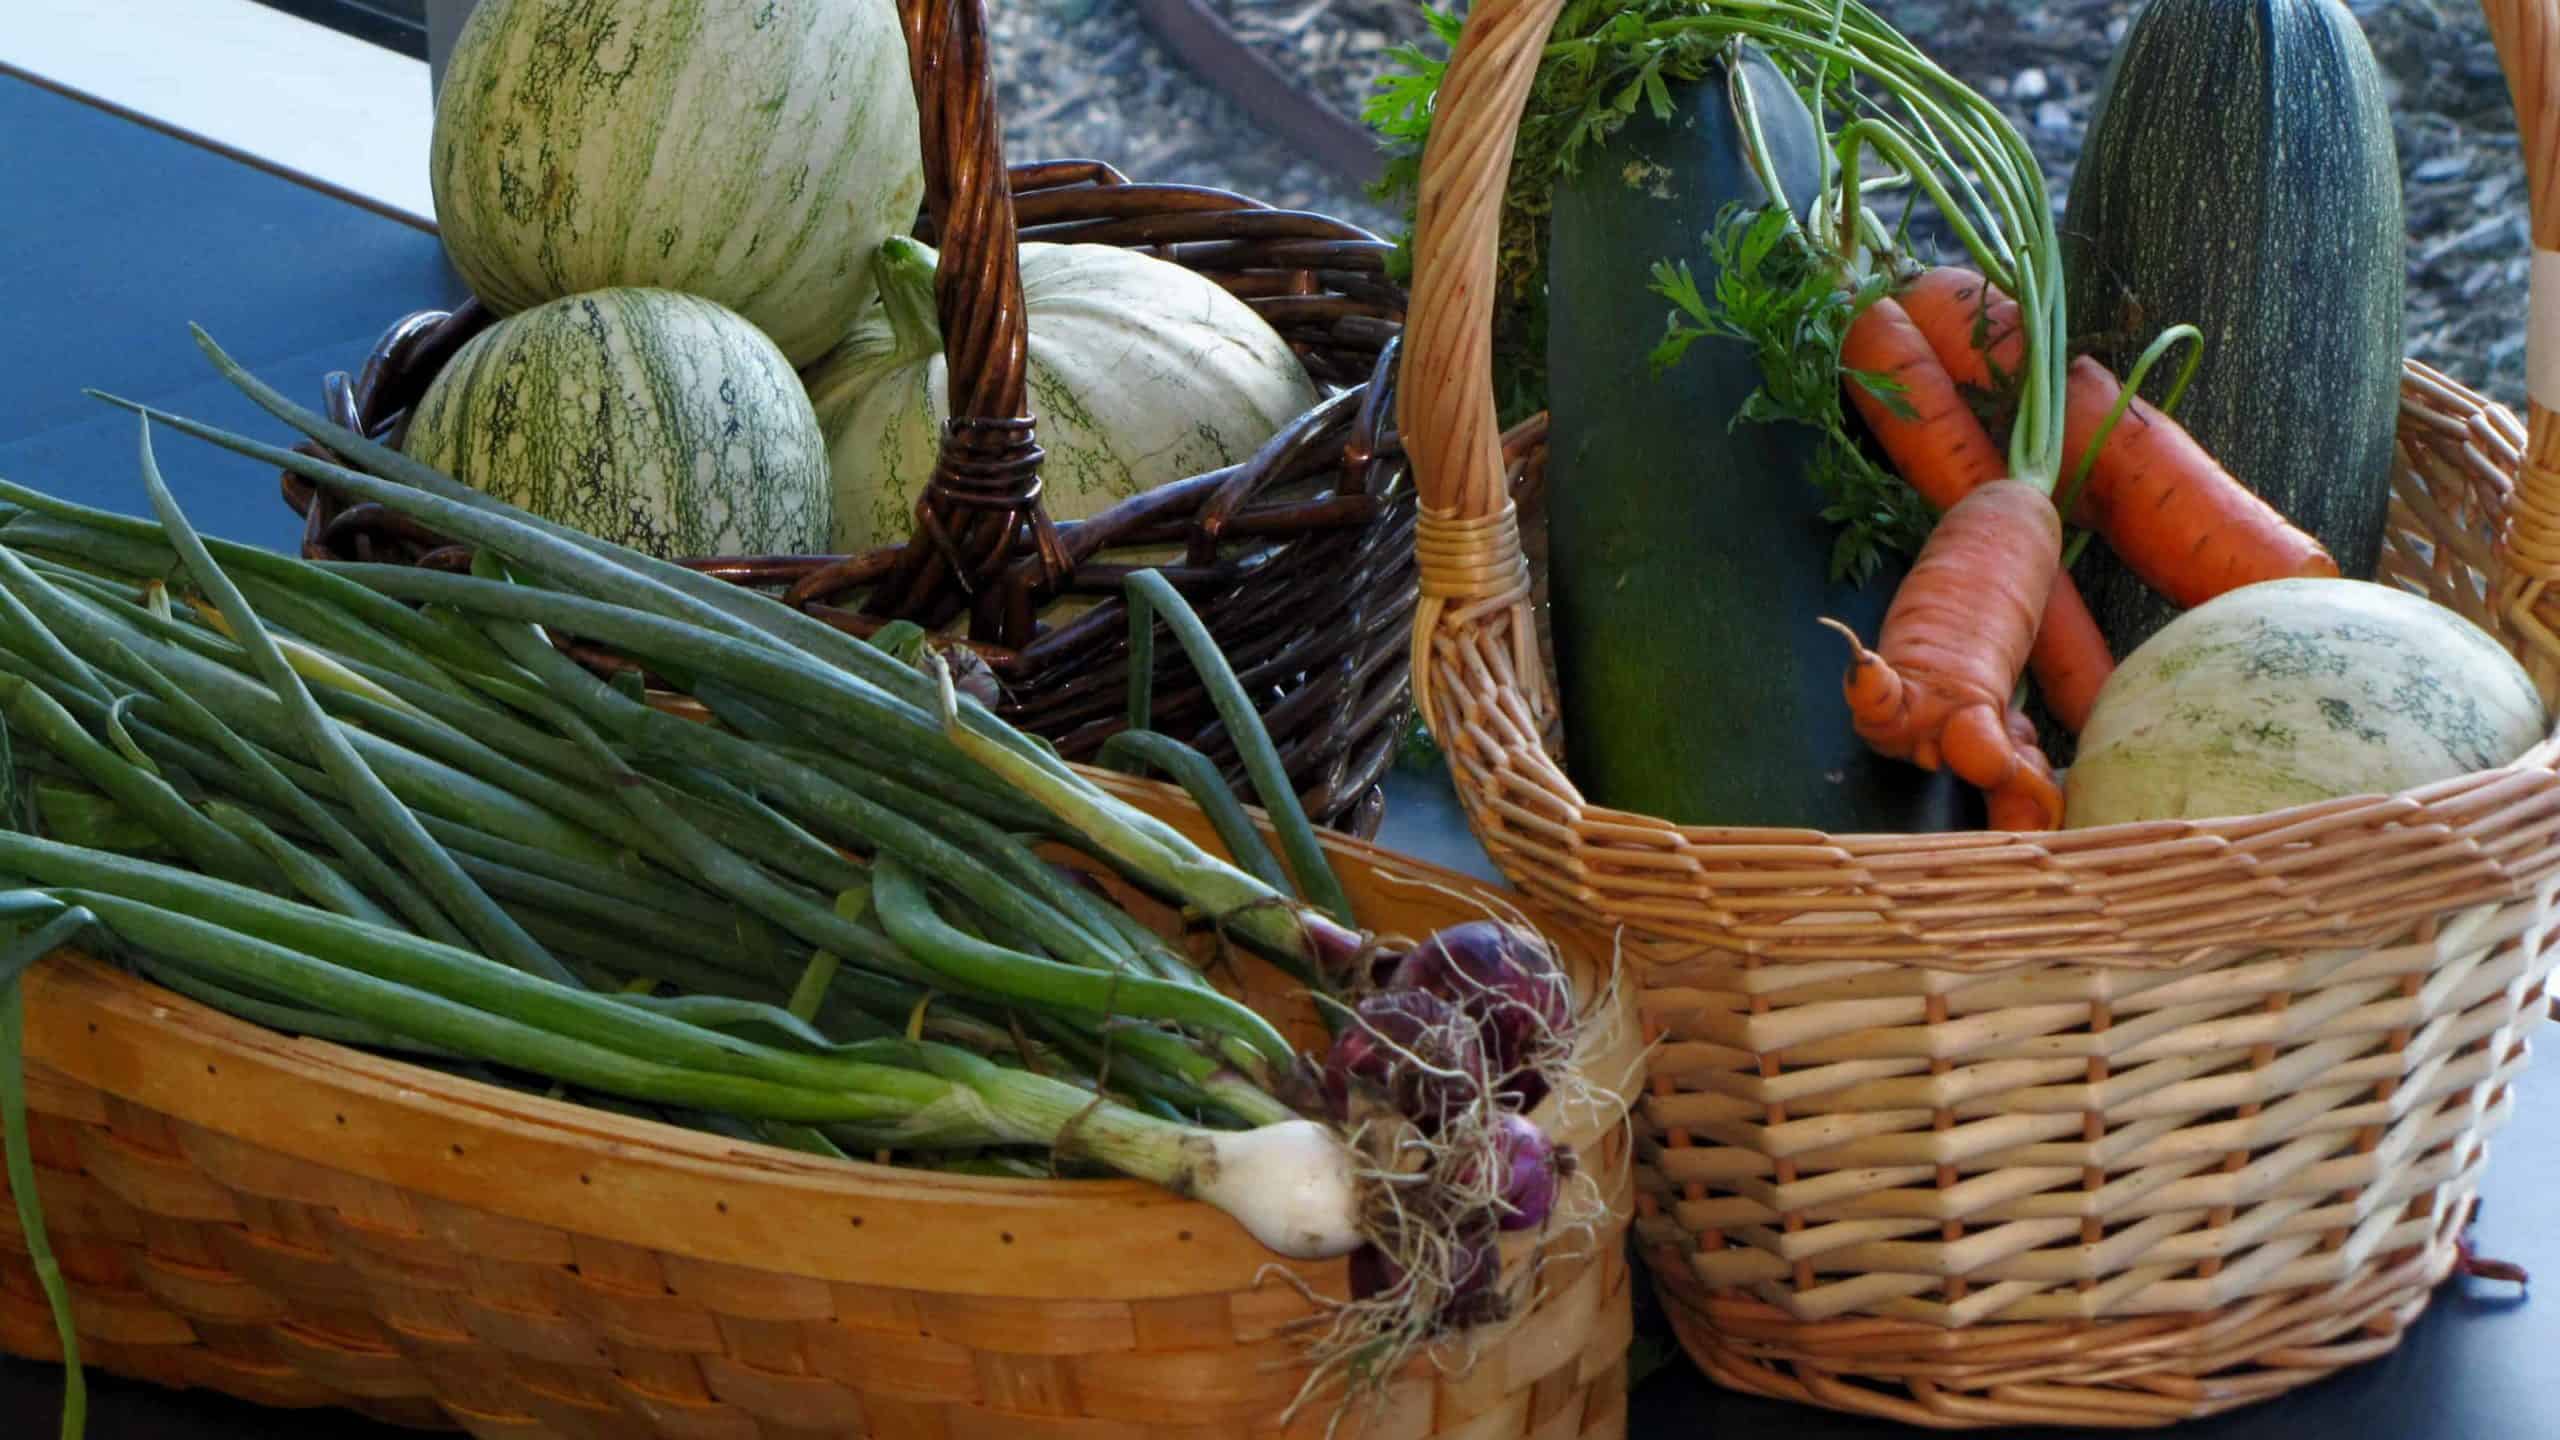 Garden baskets carry a bright cargo of scallions, carrots and more.